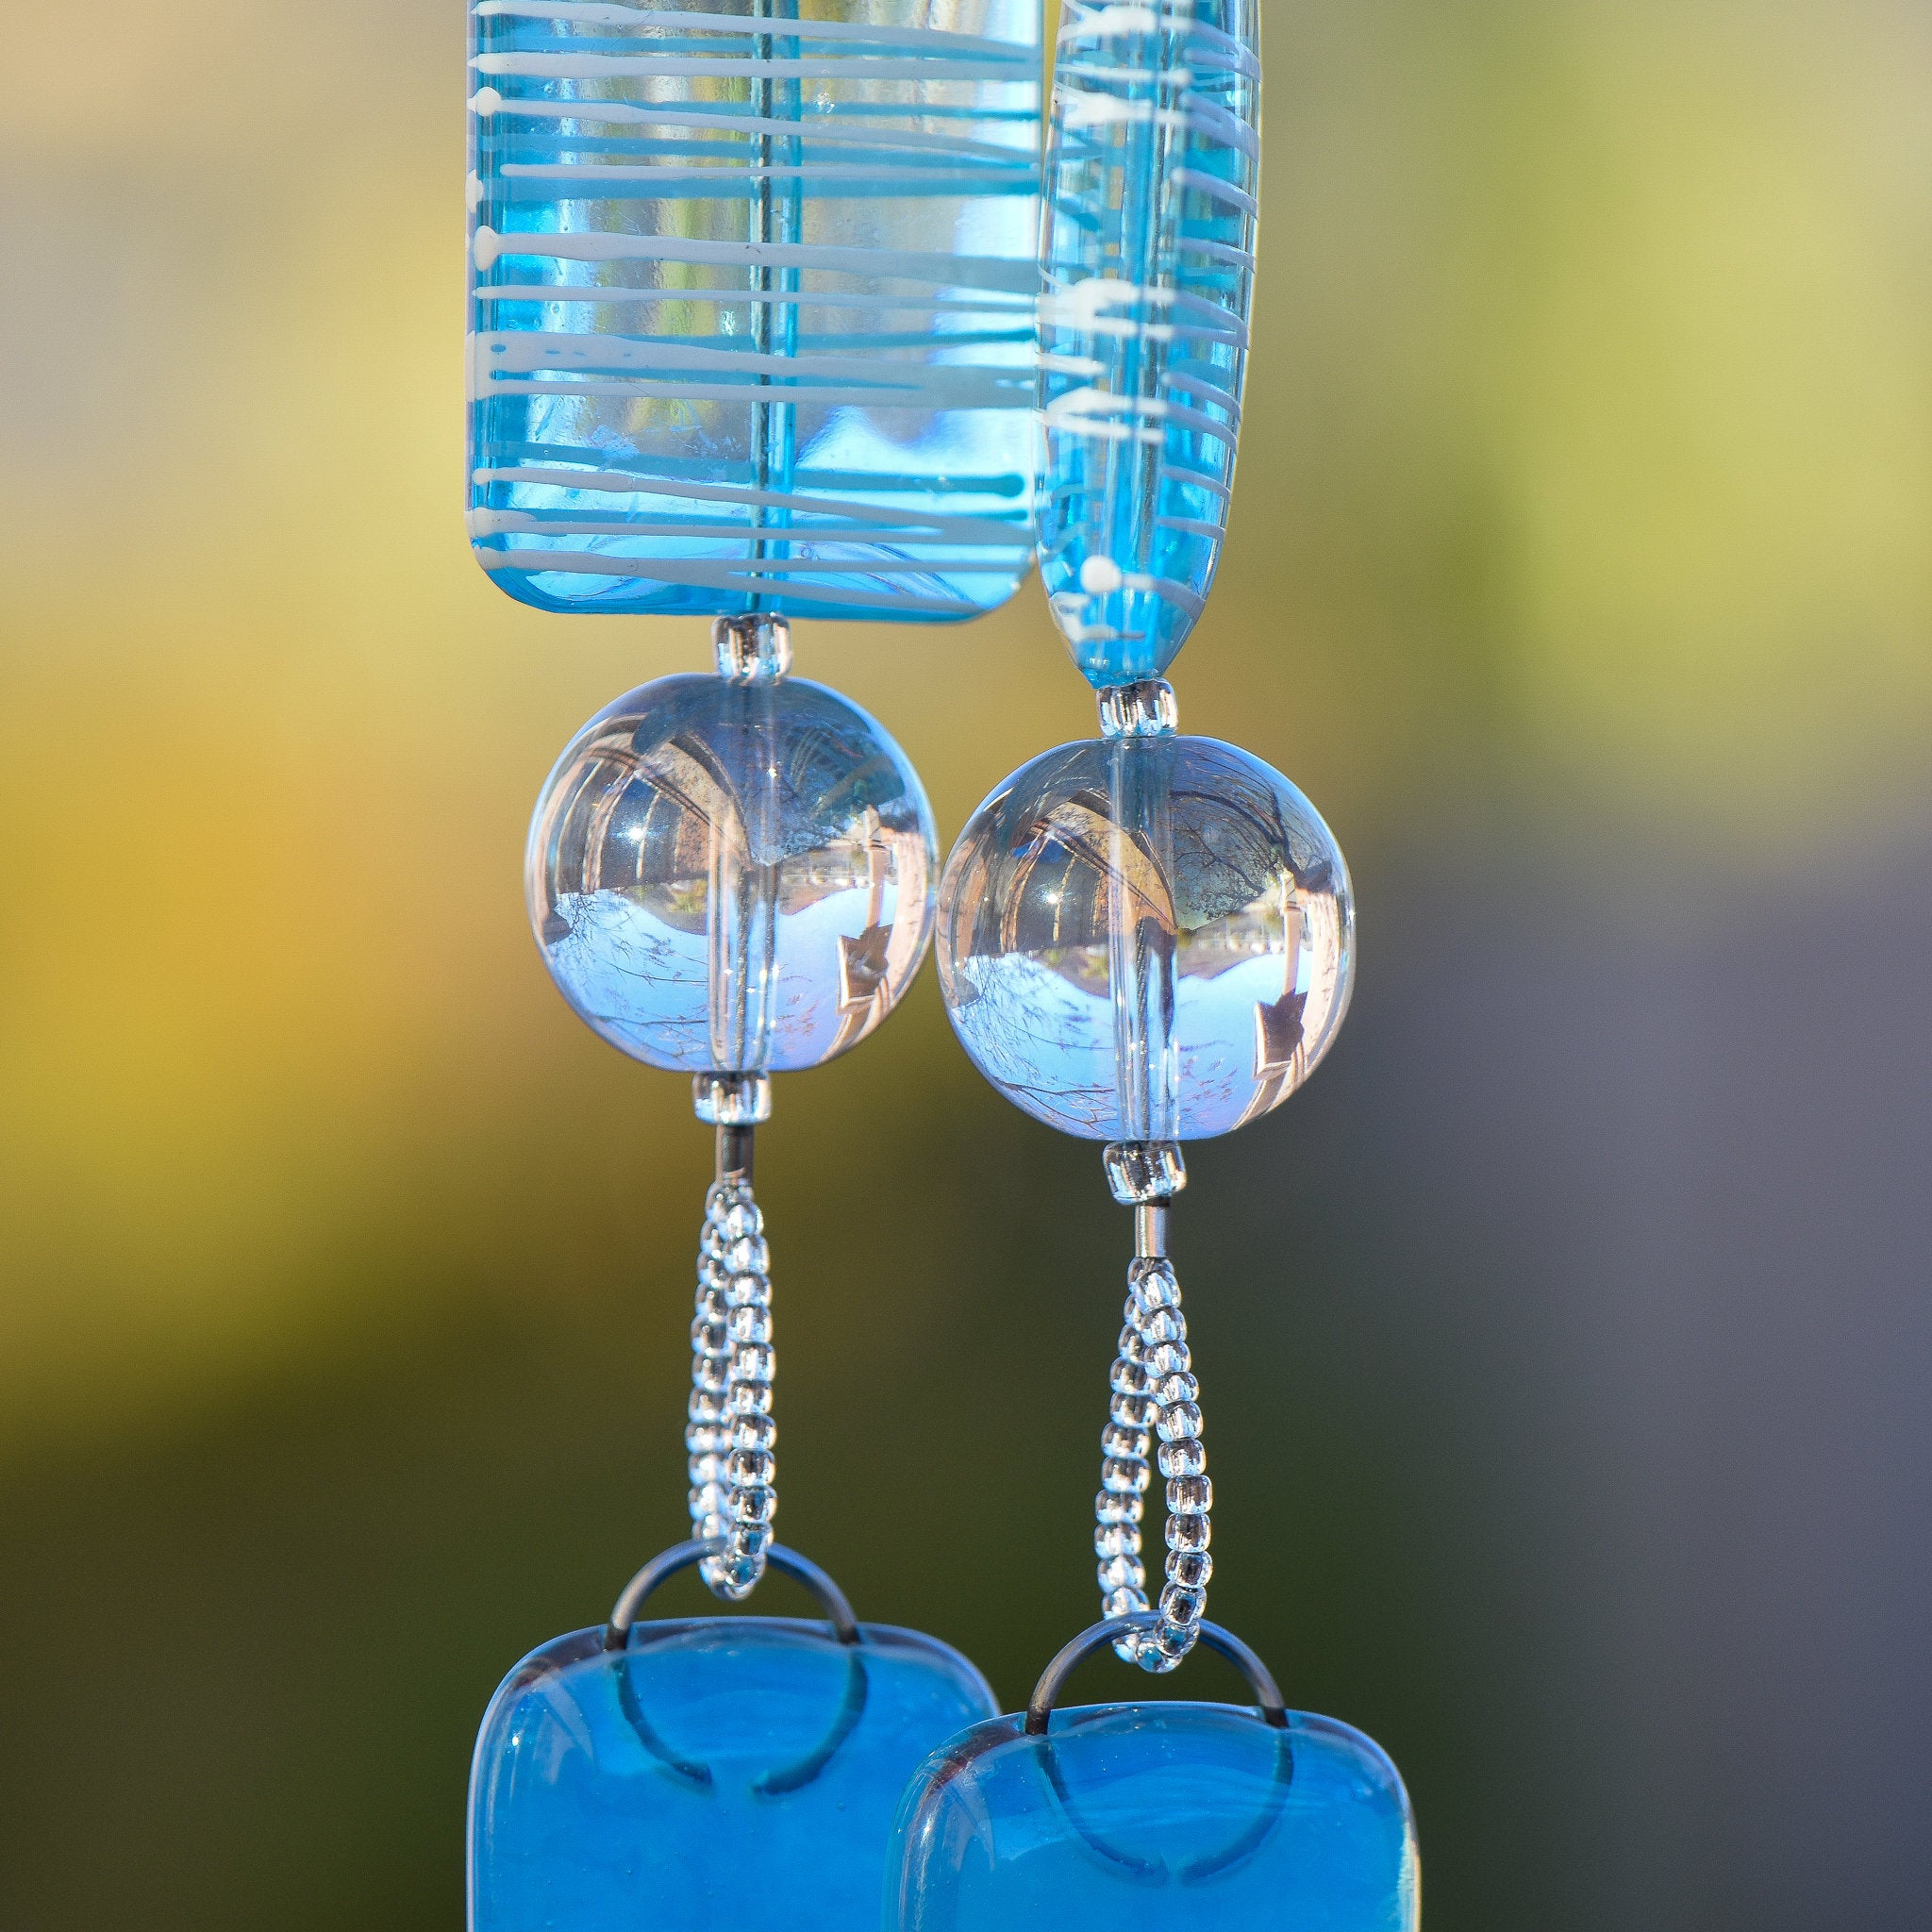 Sky Blue Sun-Catcher Wind Chime for Outdoor Patio, Porch, Balcony or Garden is a Unique Gift for the Home